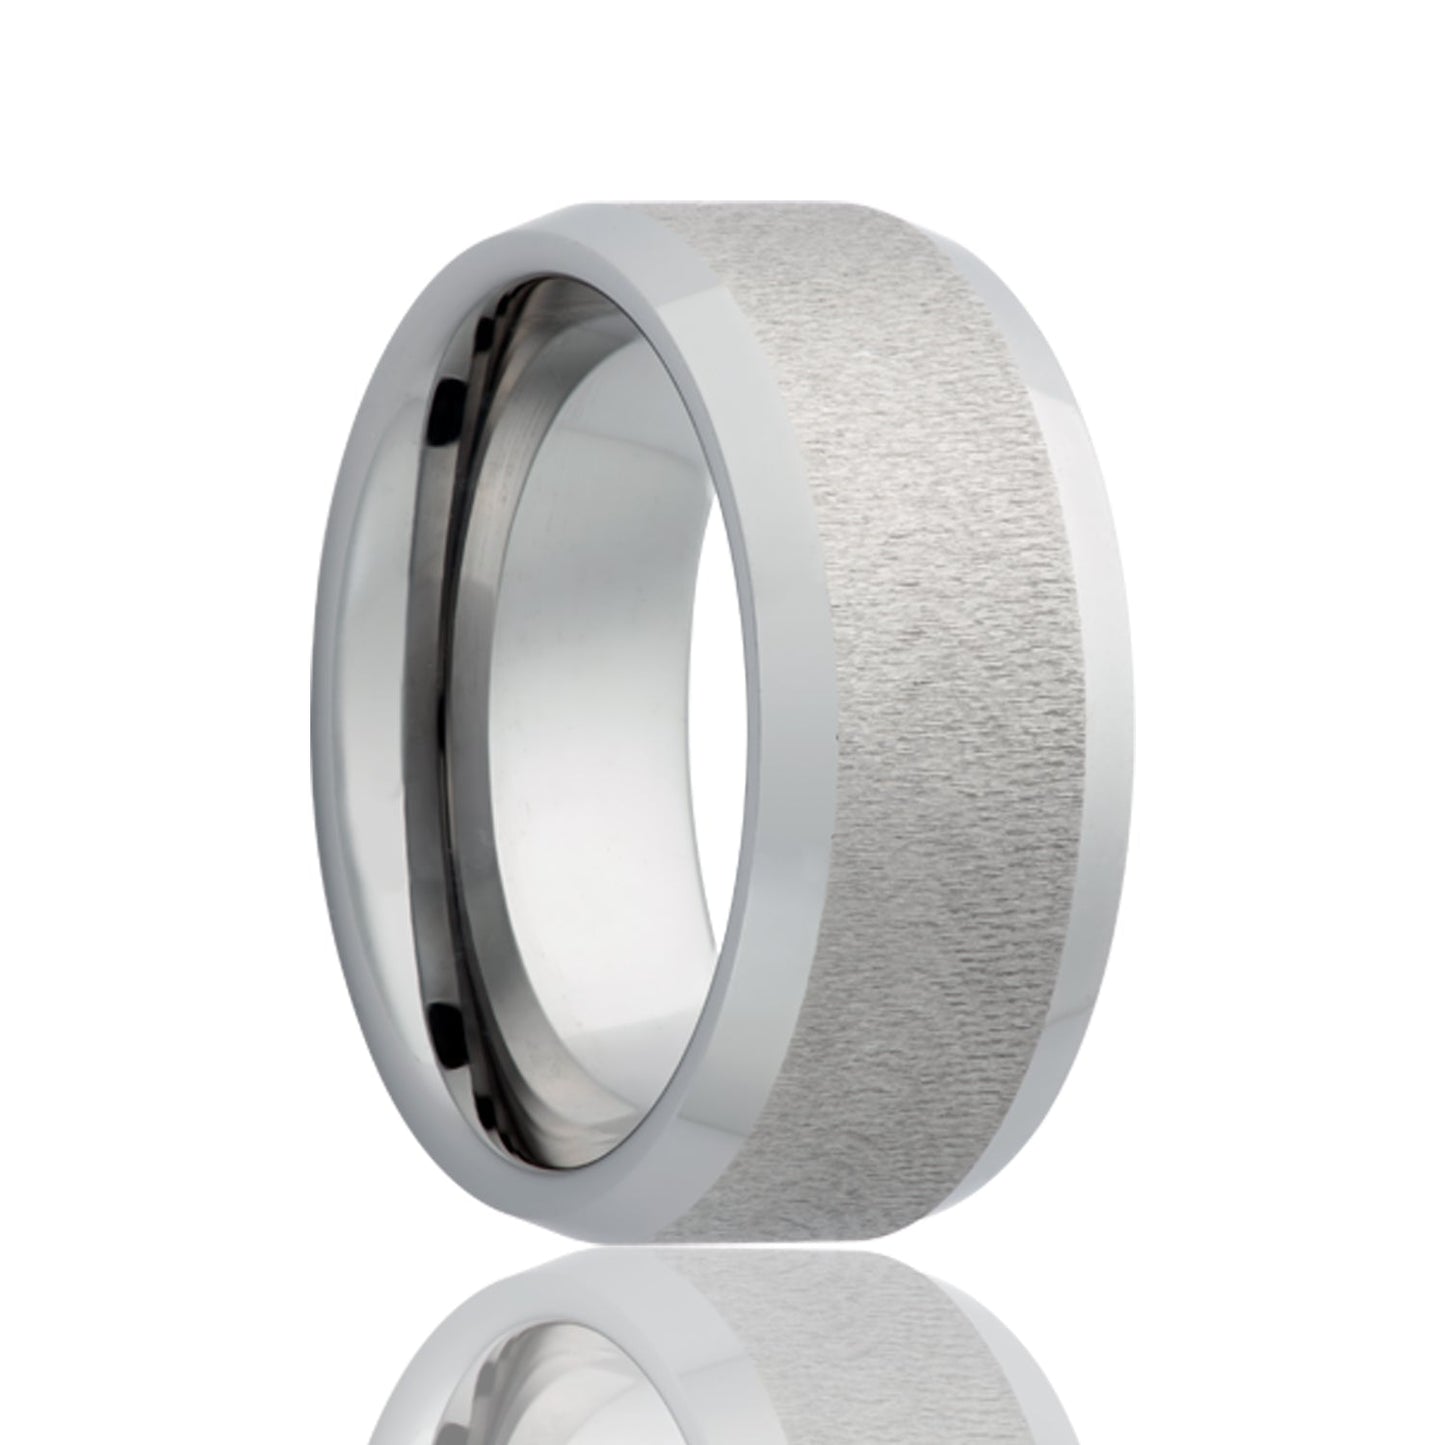 A textured finish tungsten wedding band with beveled edges displayed on a neutral white background.